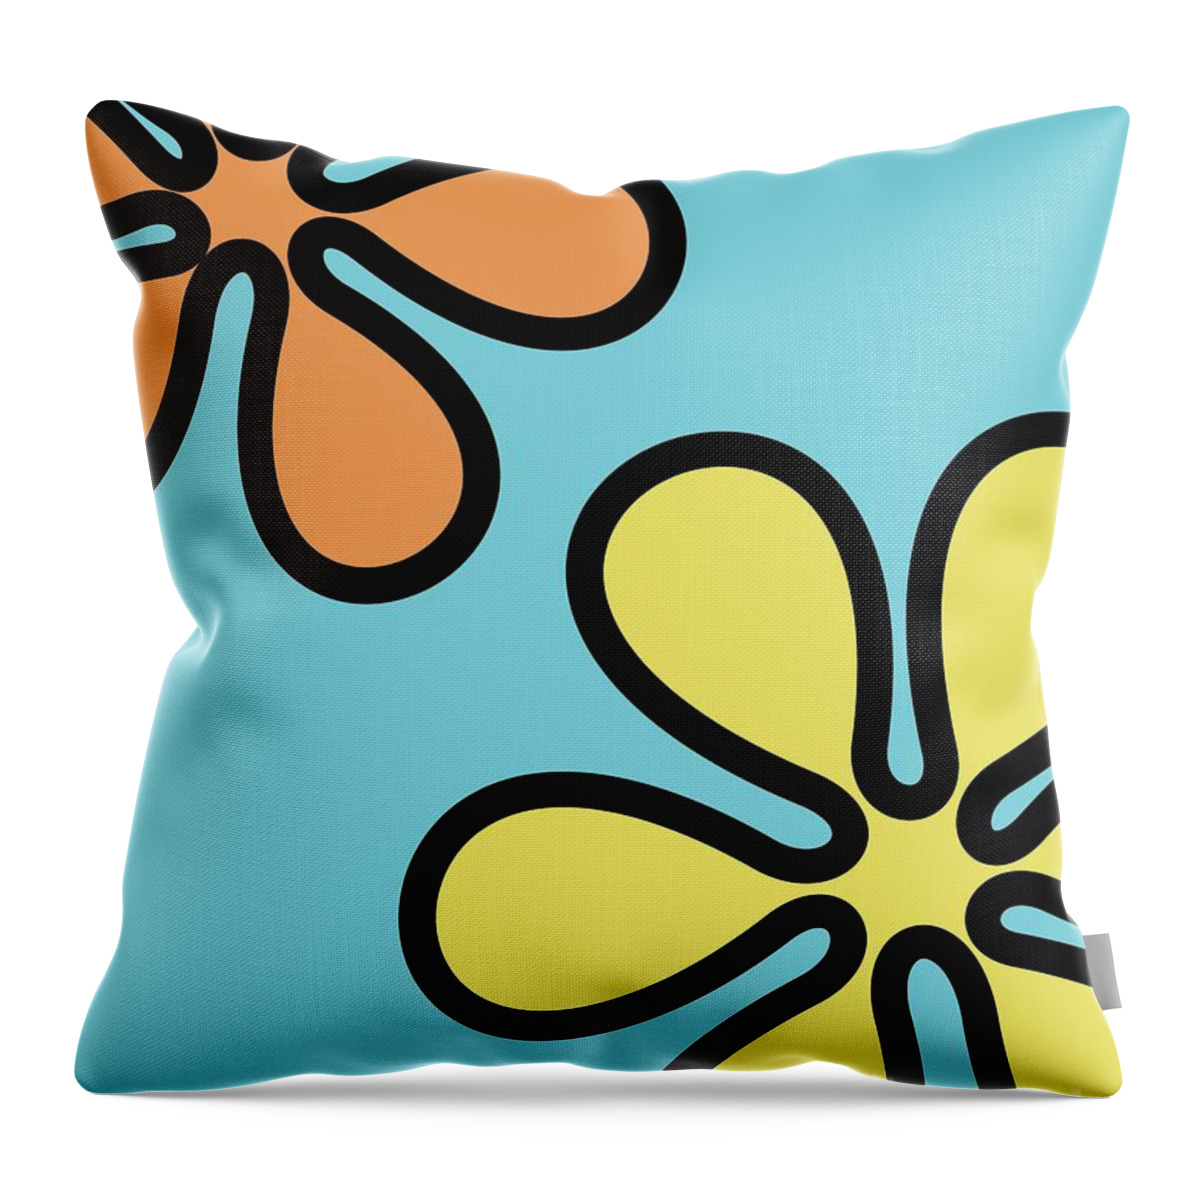 Mod Throw Pillow featuring the digital art Mod Flowers on Blue by Donna Mibus